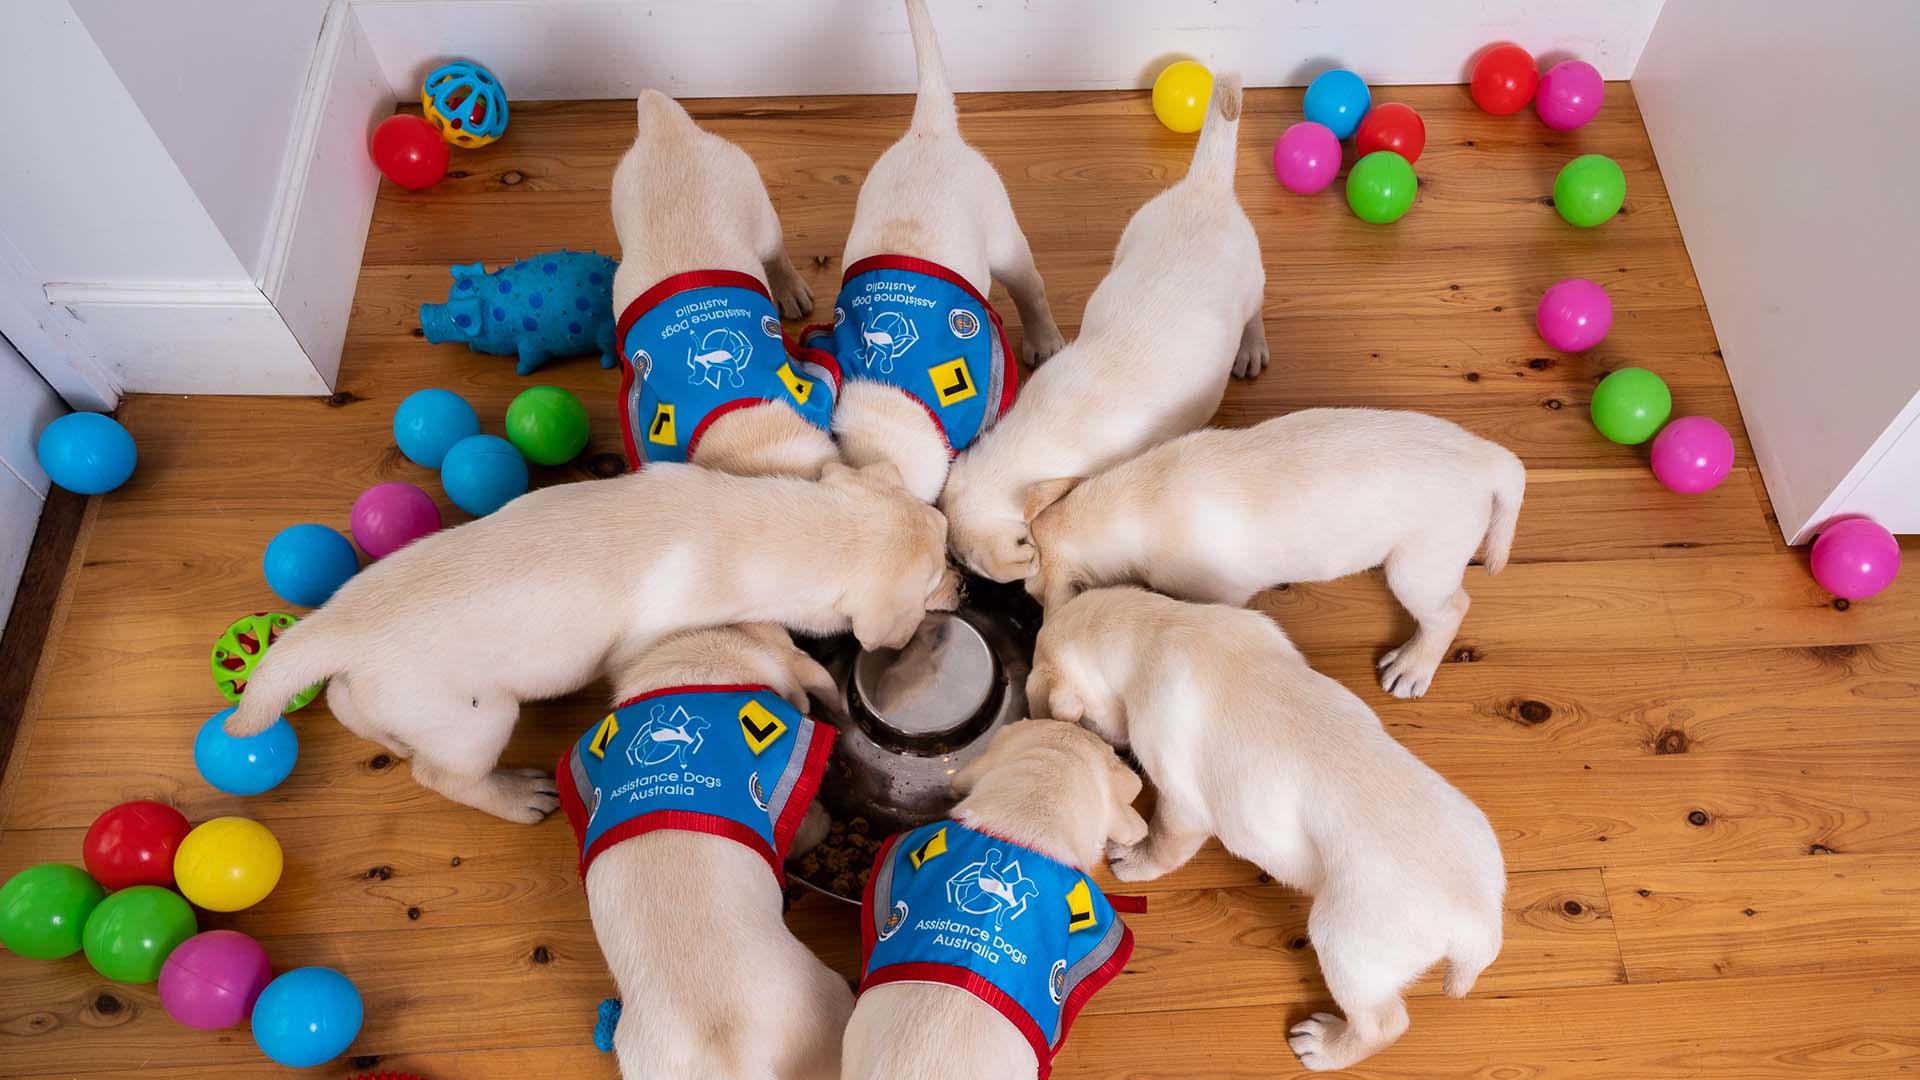 Assistance Dogs Australia Needs You to Look After These Fresh New Pups